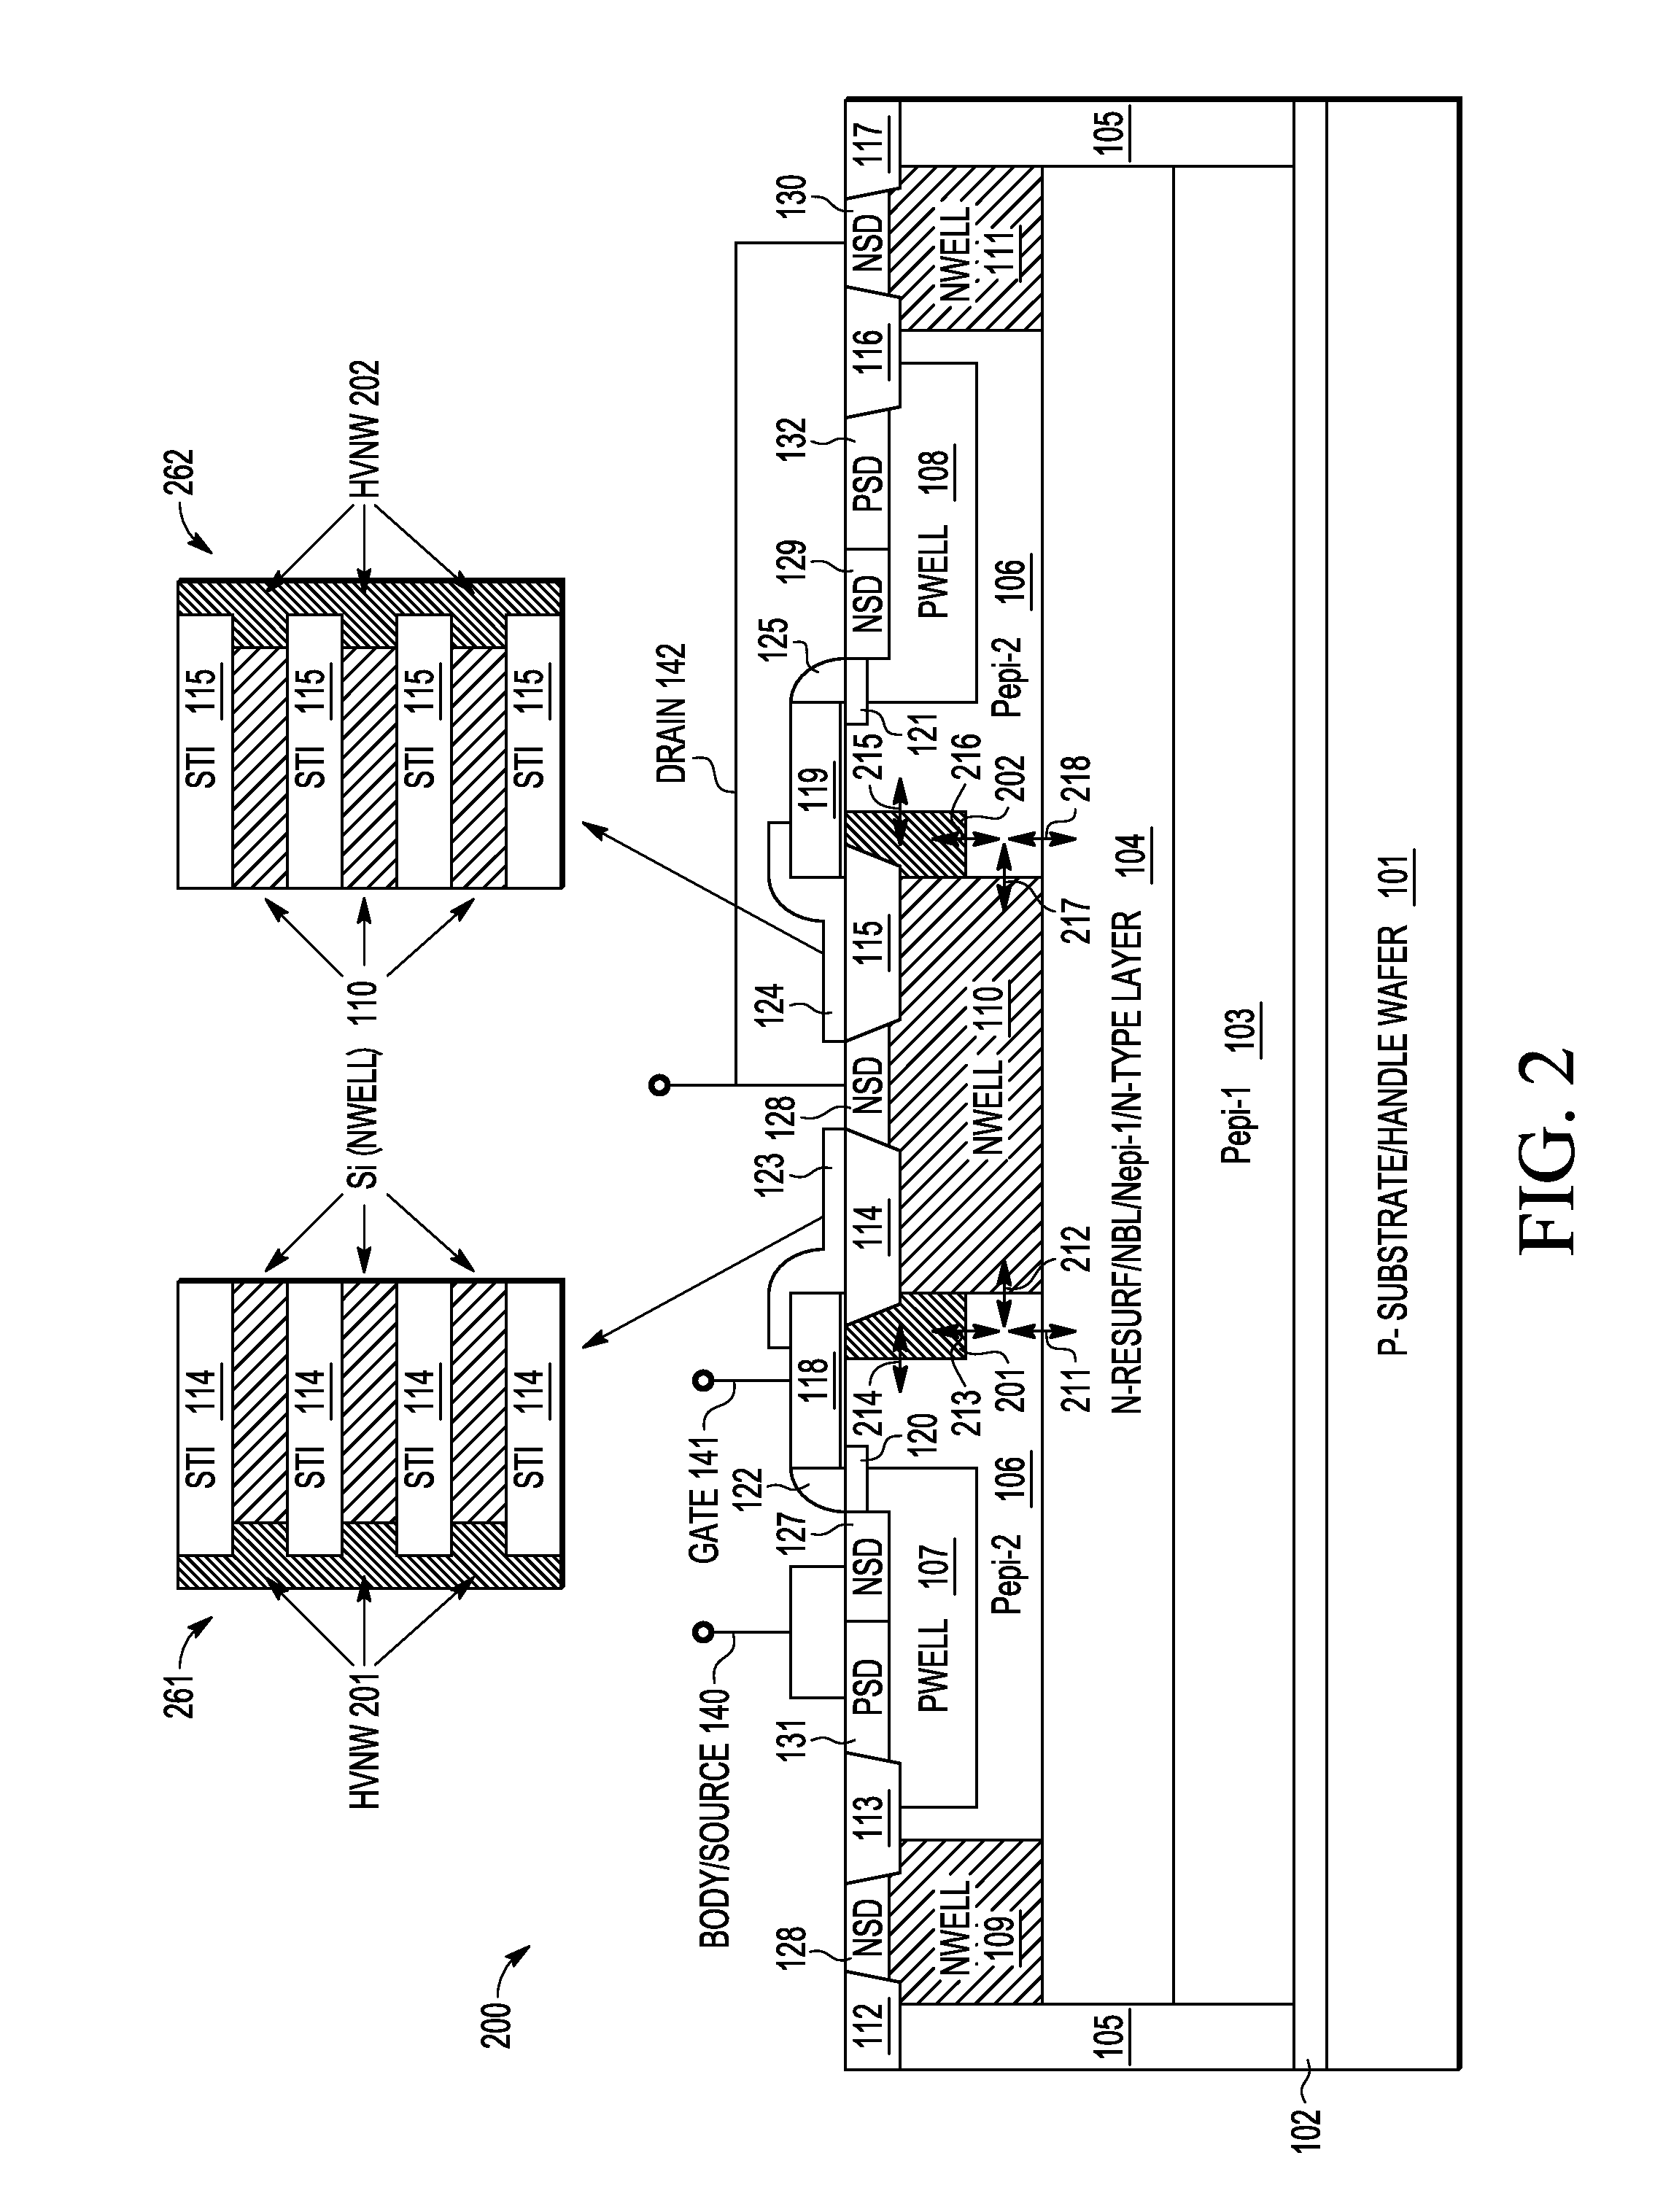 Partially Depleted Dielectric Resurf LDMOS